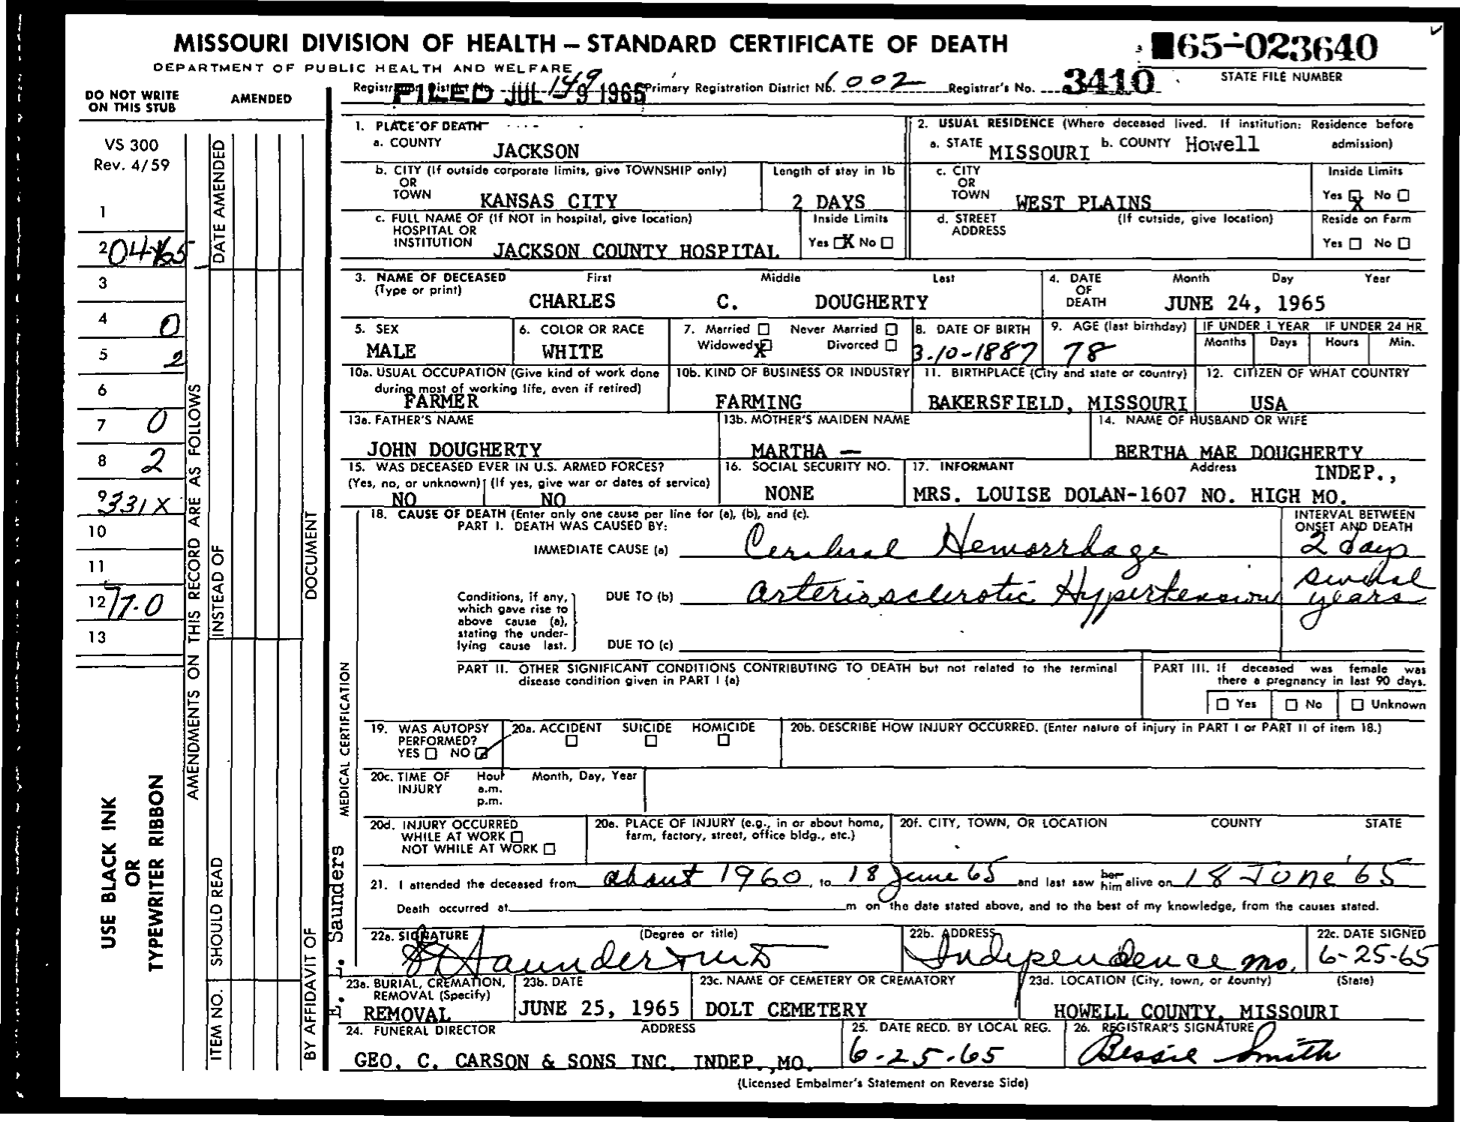 Charles C. Dougherty Death Certificate